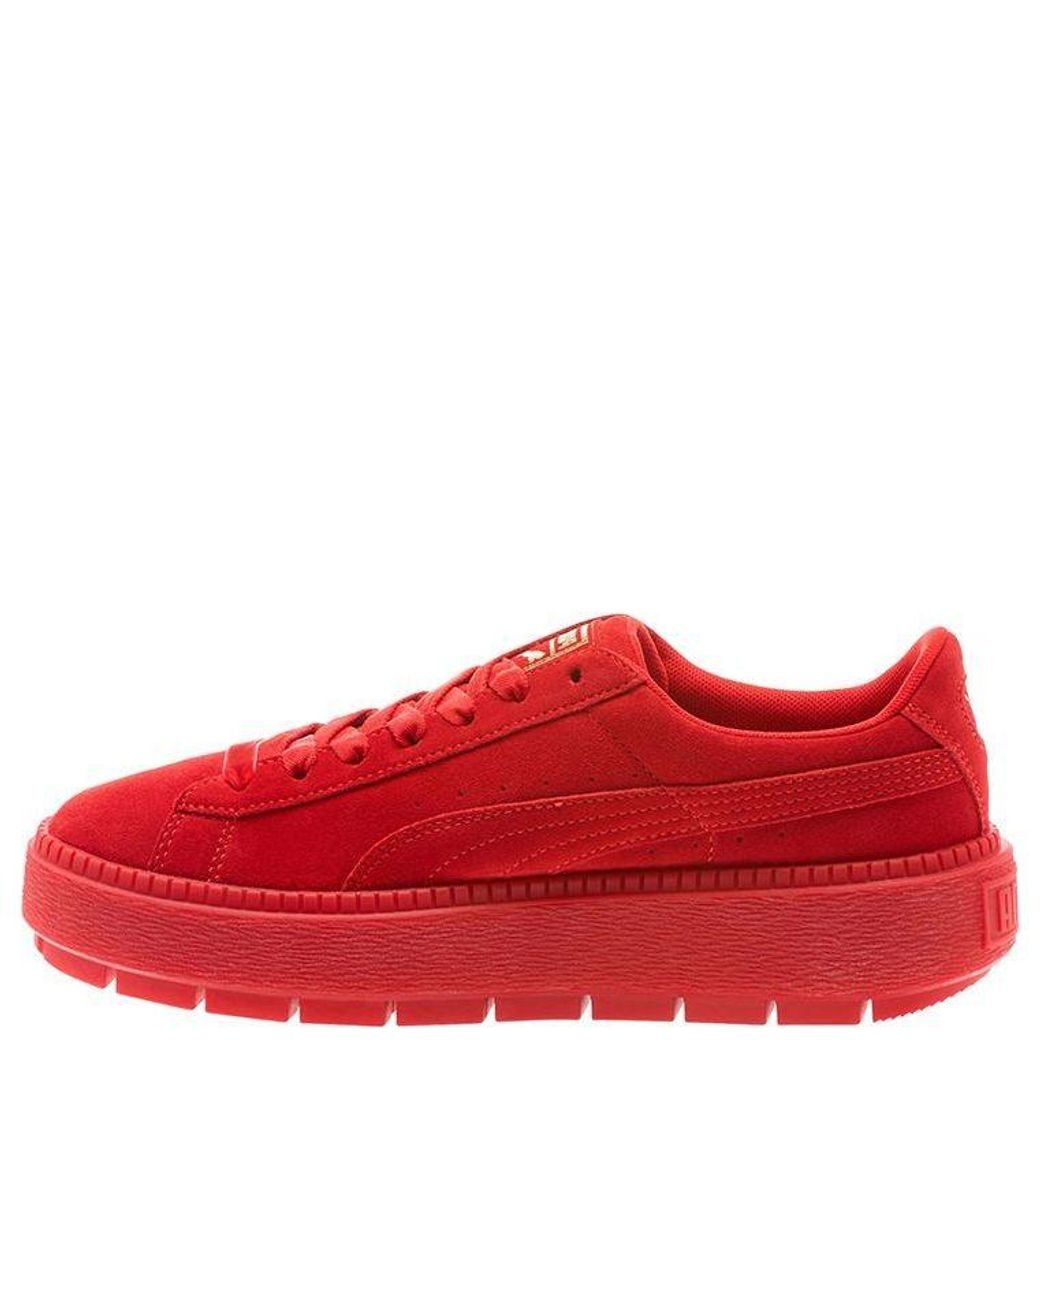 PUMA Suede Platform Trace Valentine S Day Sneakers Red | Lyst